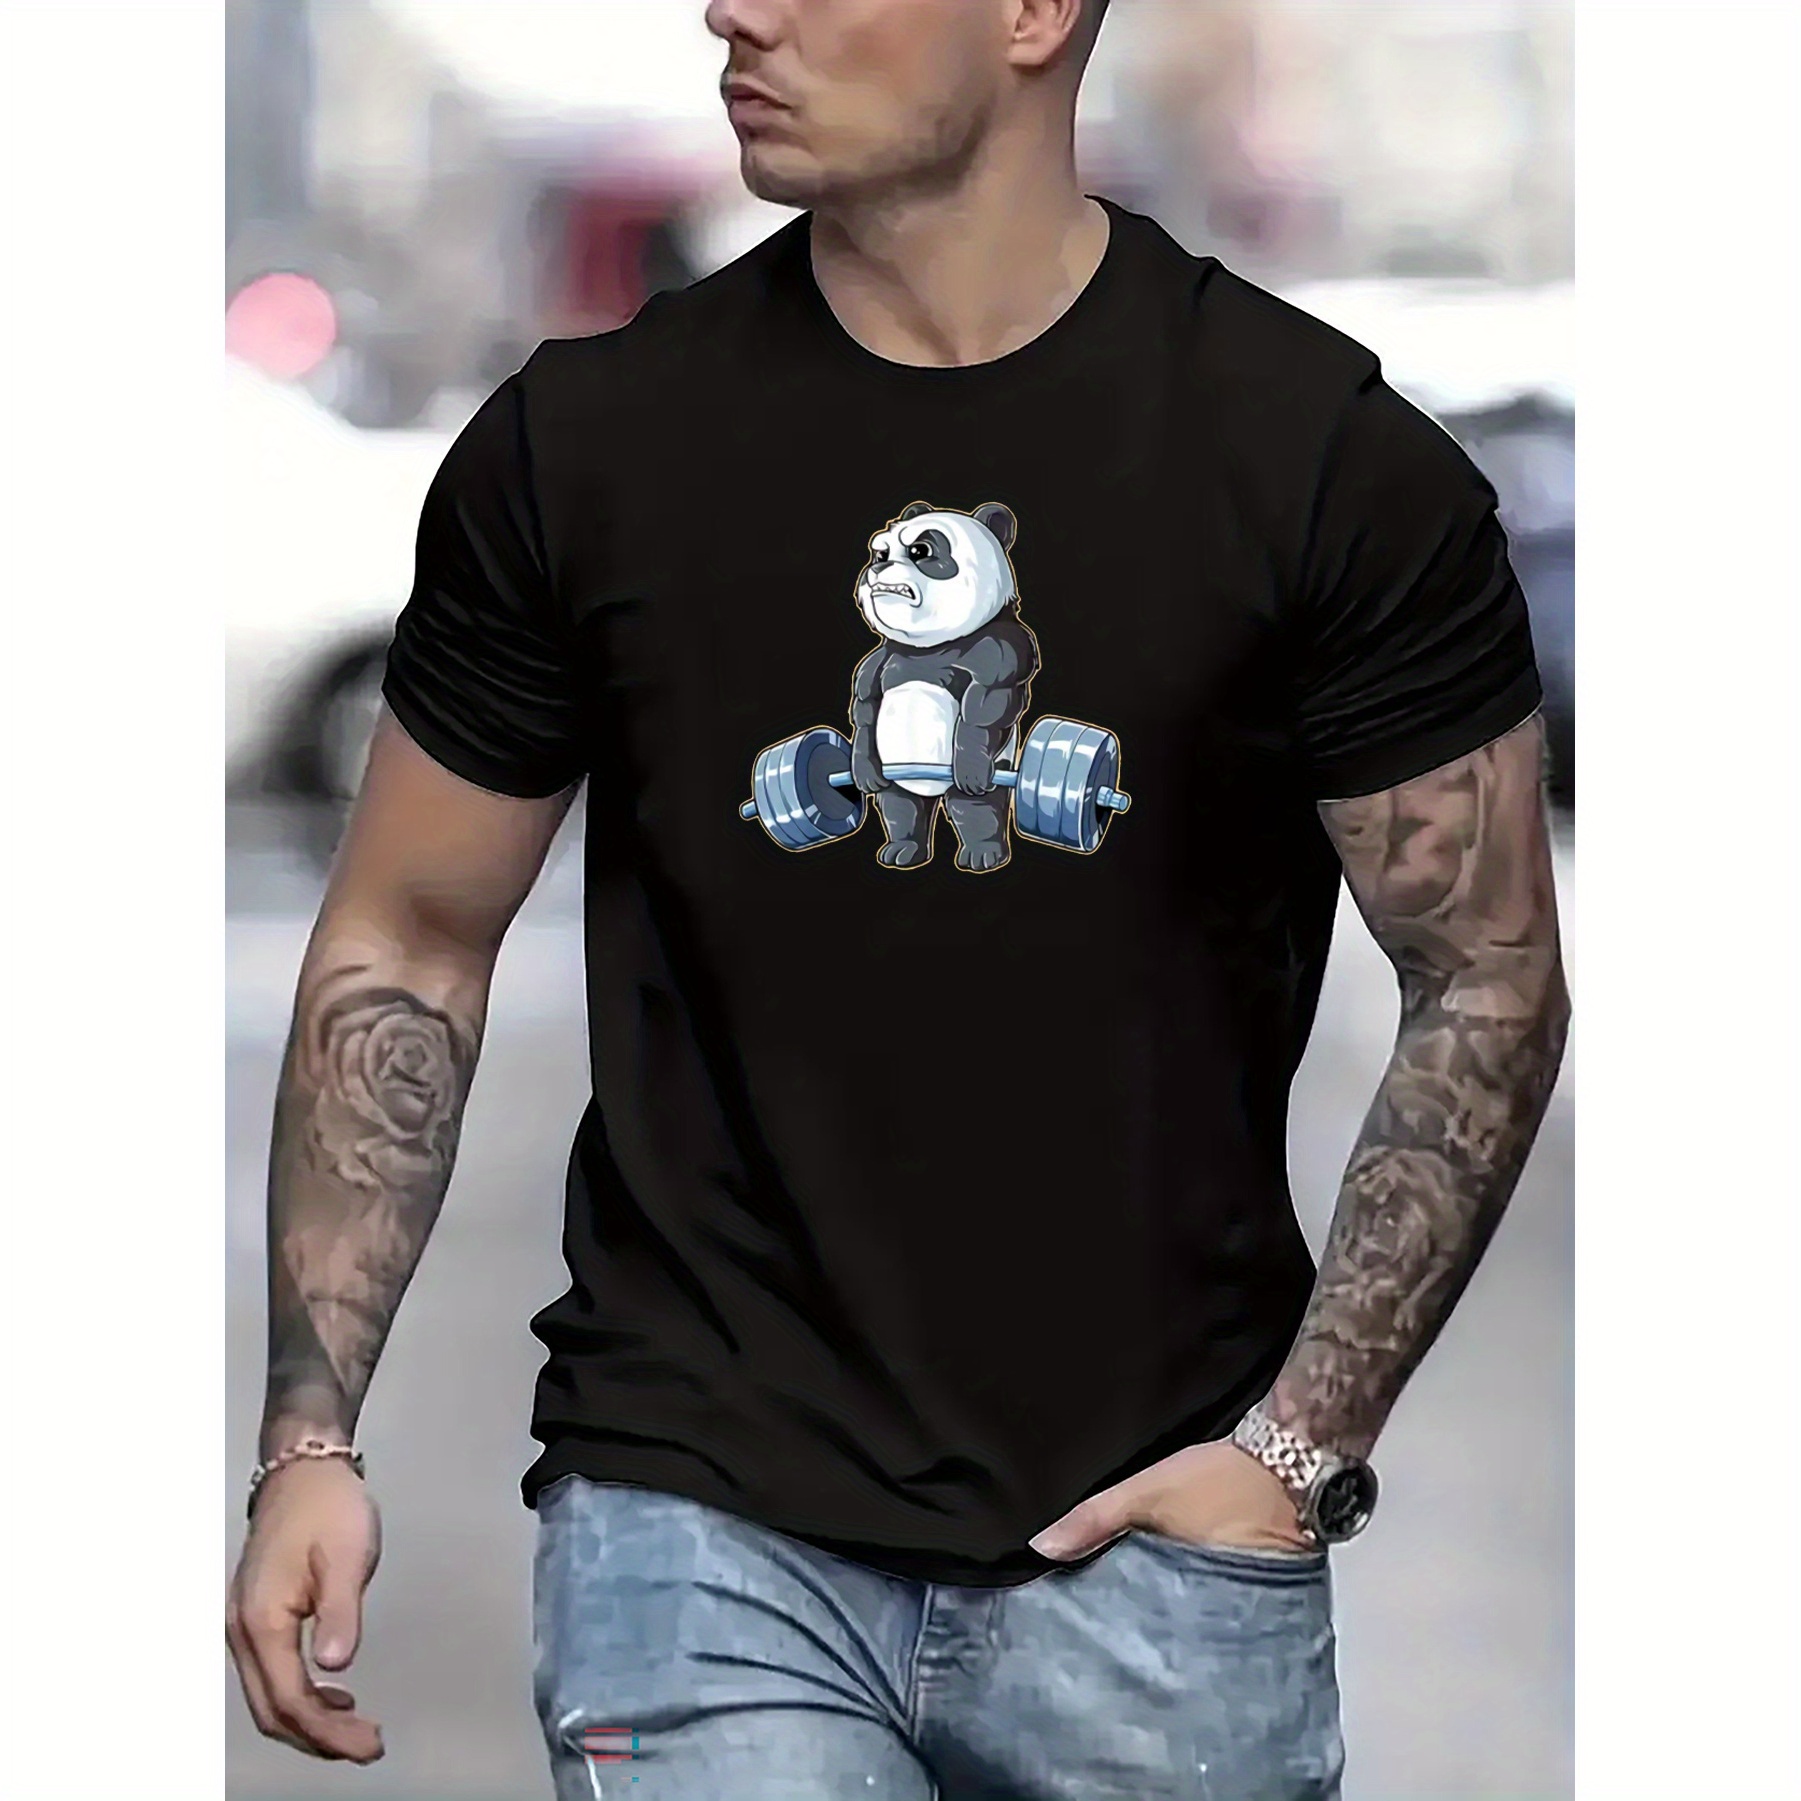 

Panda Lifting Barbell Pattern Print Casual Crew Neck Short Sleeve T-shirt For Men, Quick-drying Comfy Casual Summer T-shirt For Daily Wear Work Out And Vacation Resorts